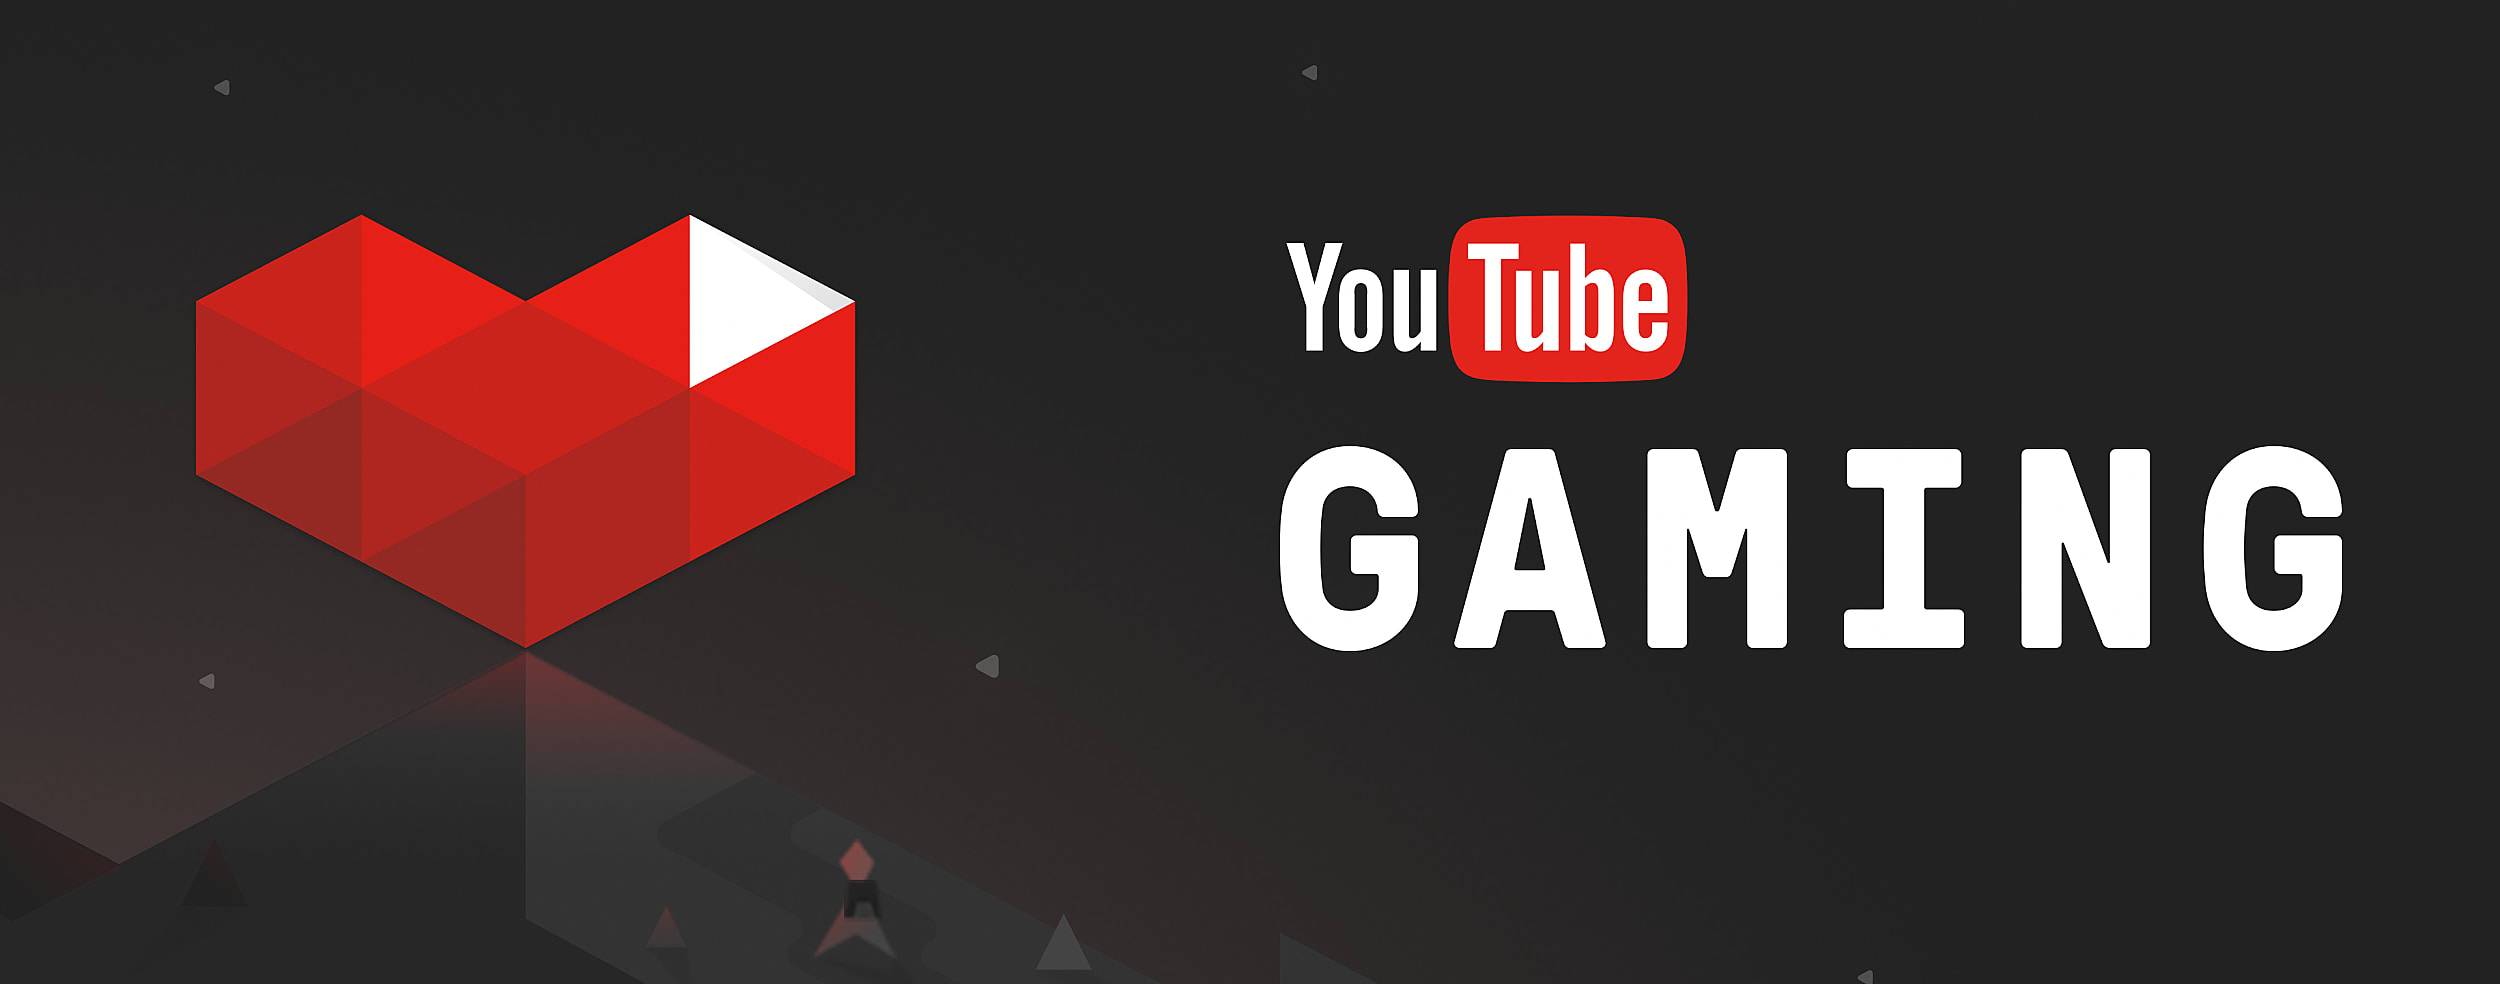 Google Kills Its Twitch Killer The Youtube Gaming App Shuts Down This Week Ars Technica